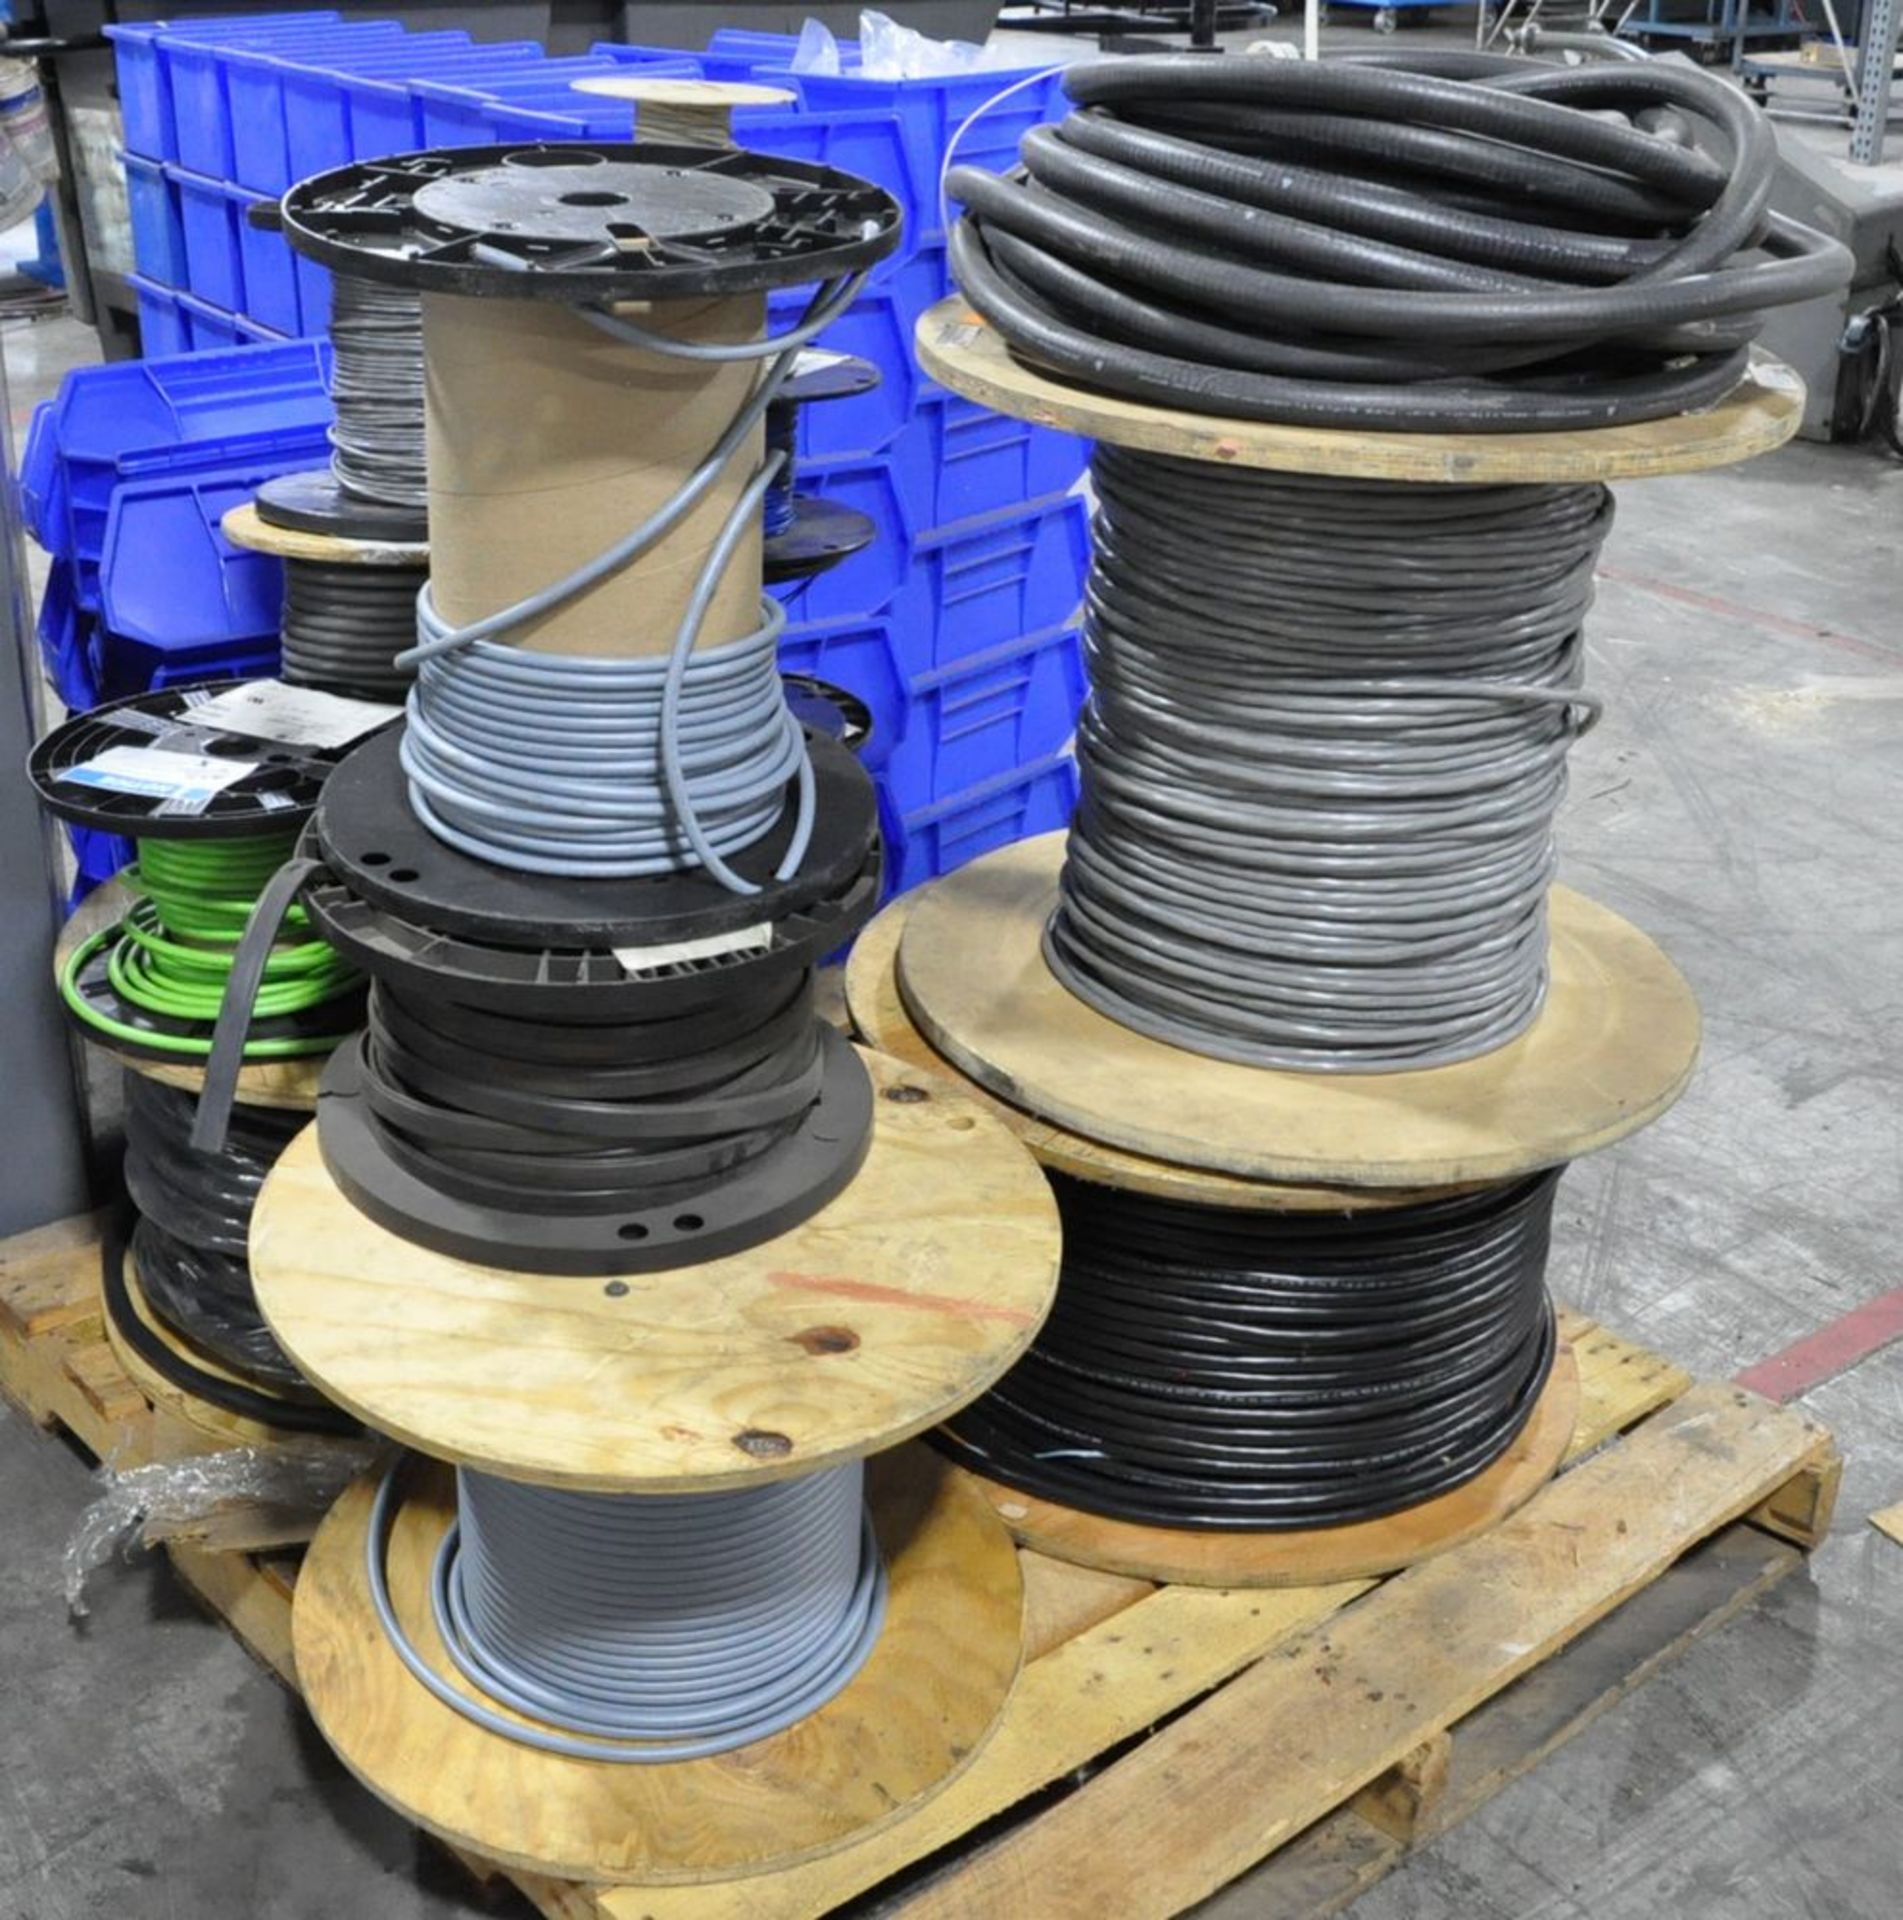 Lot-Spools of Various Industrial Wire on (2) Pallets, (Plant 2) - Image 5 of 5